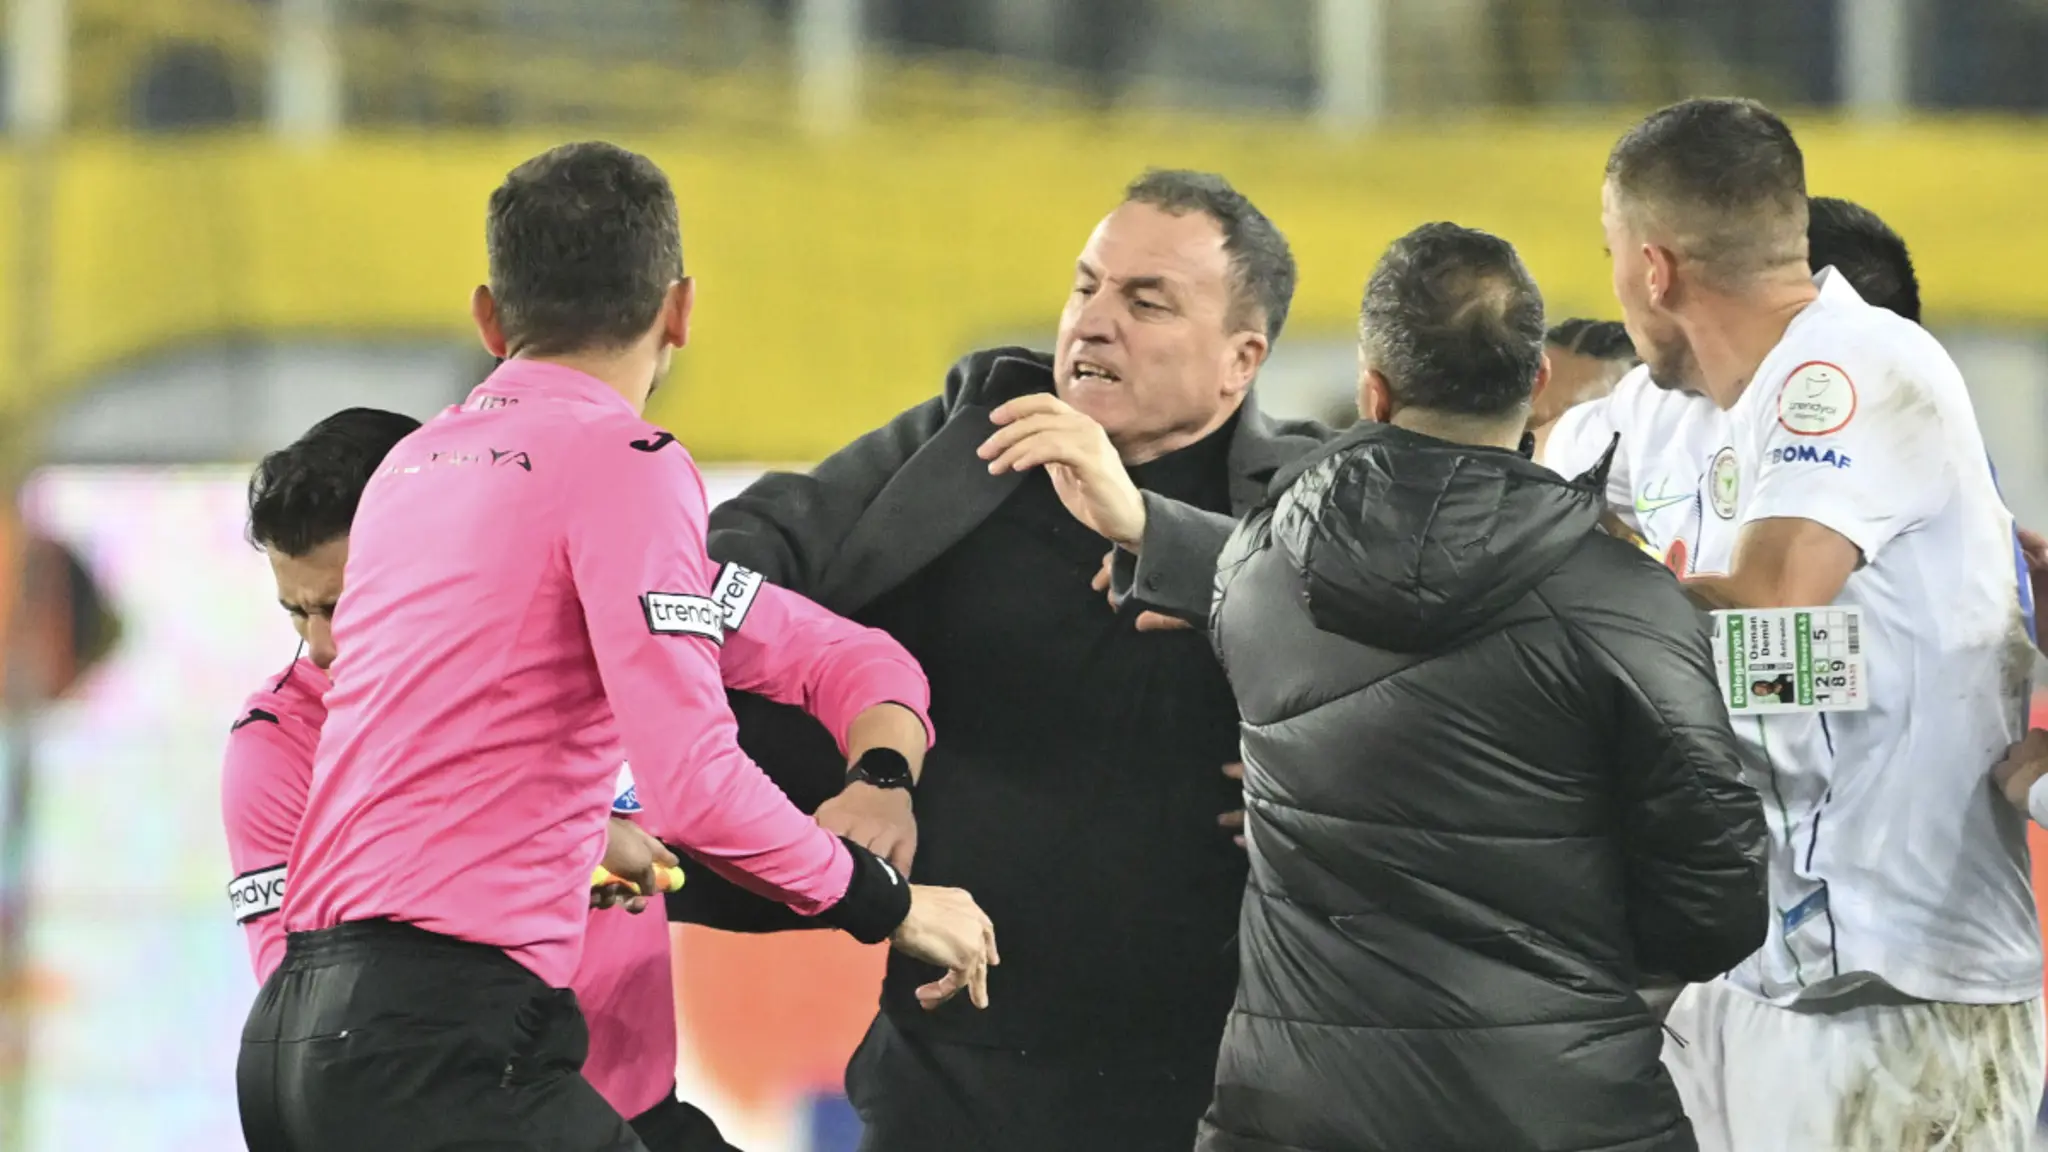 Turkish club president given permanent ban for punching referee | SuperSport